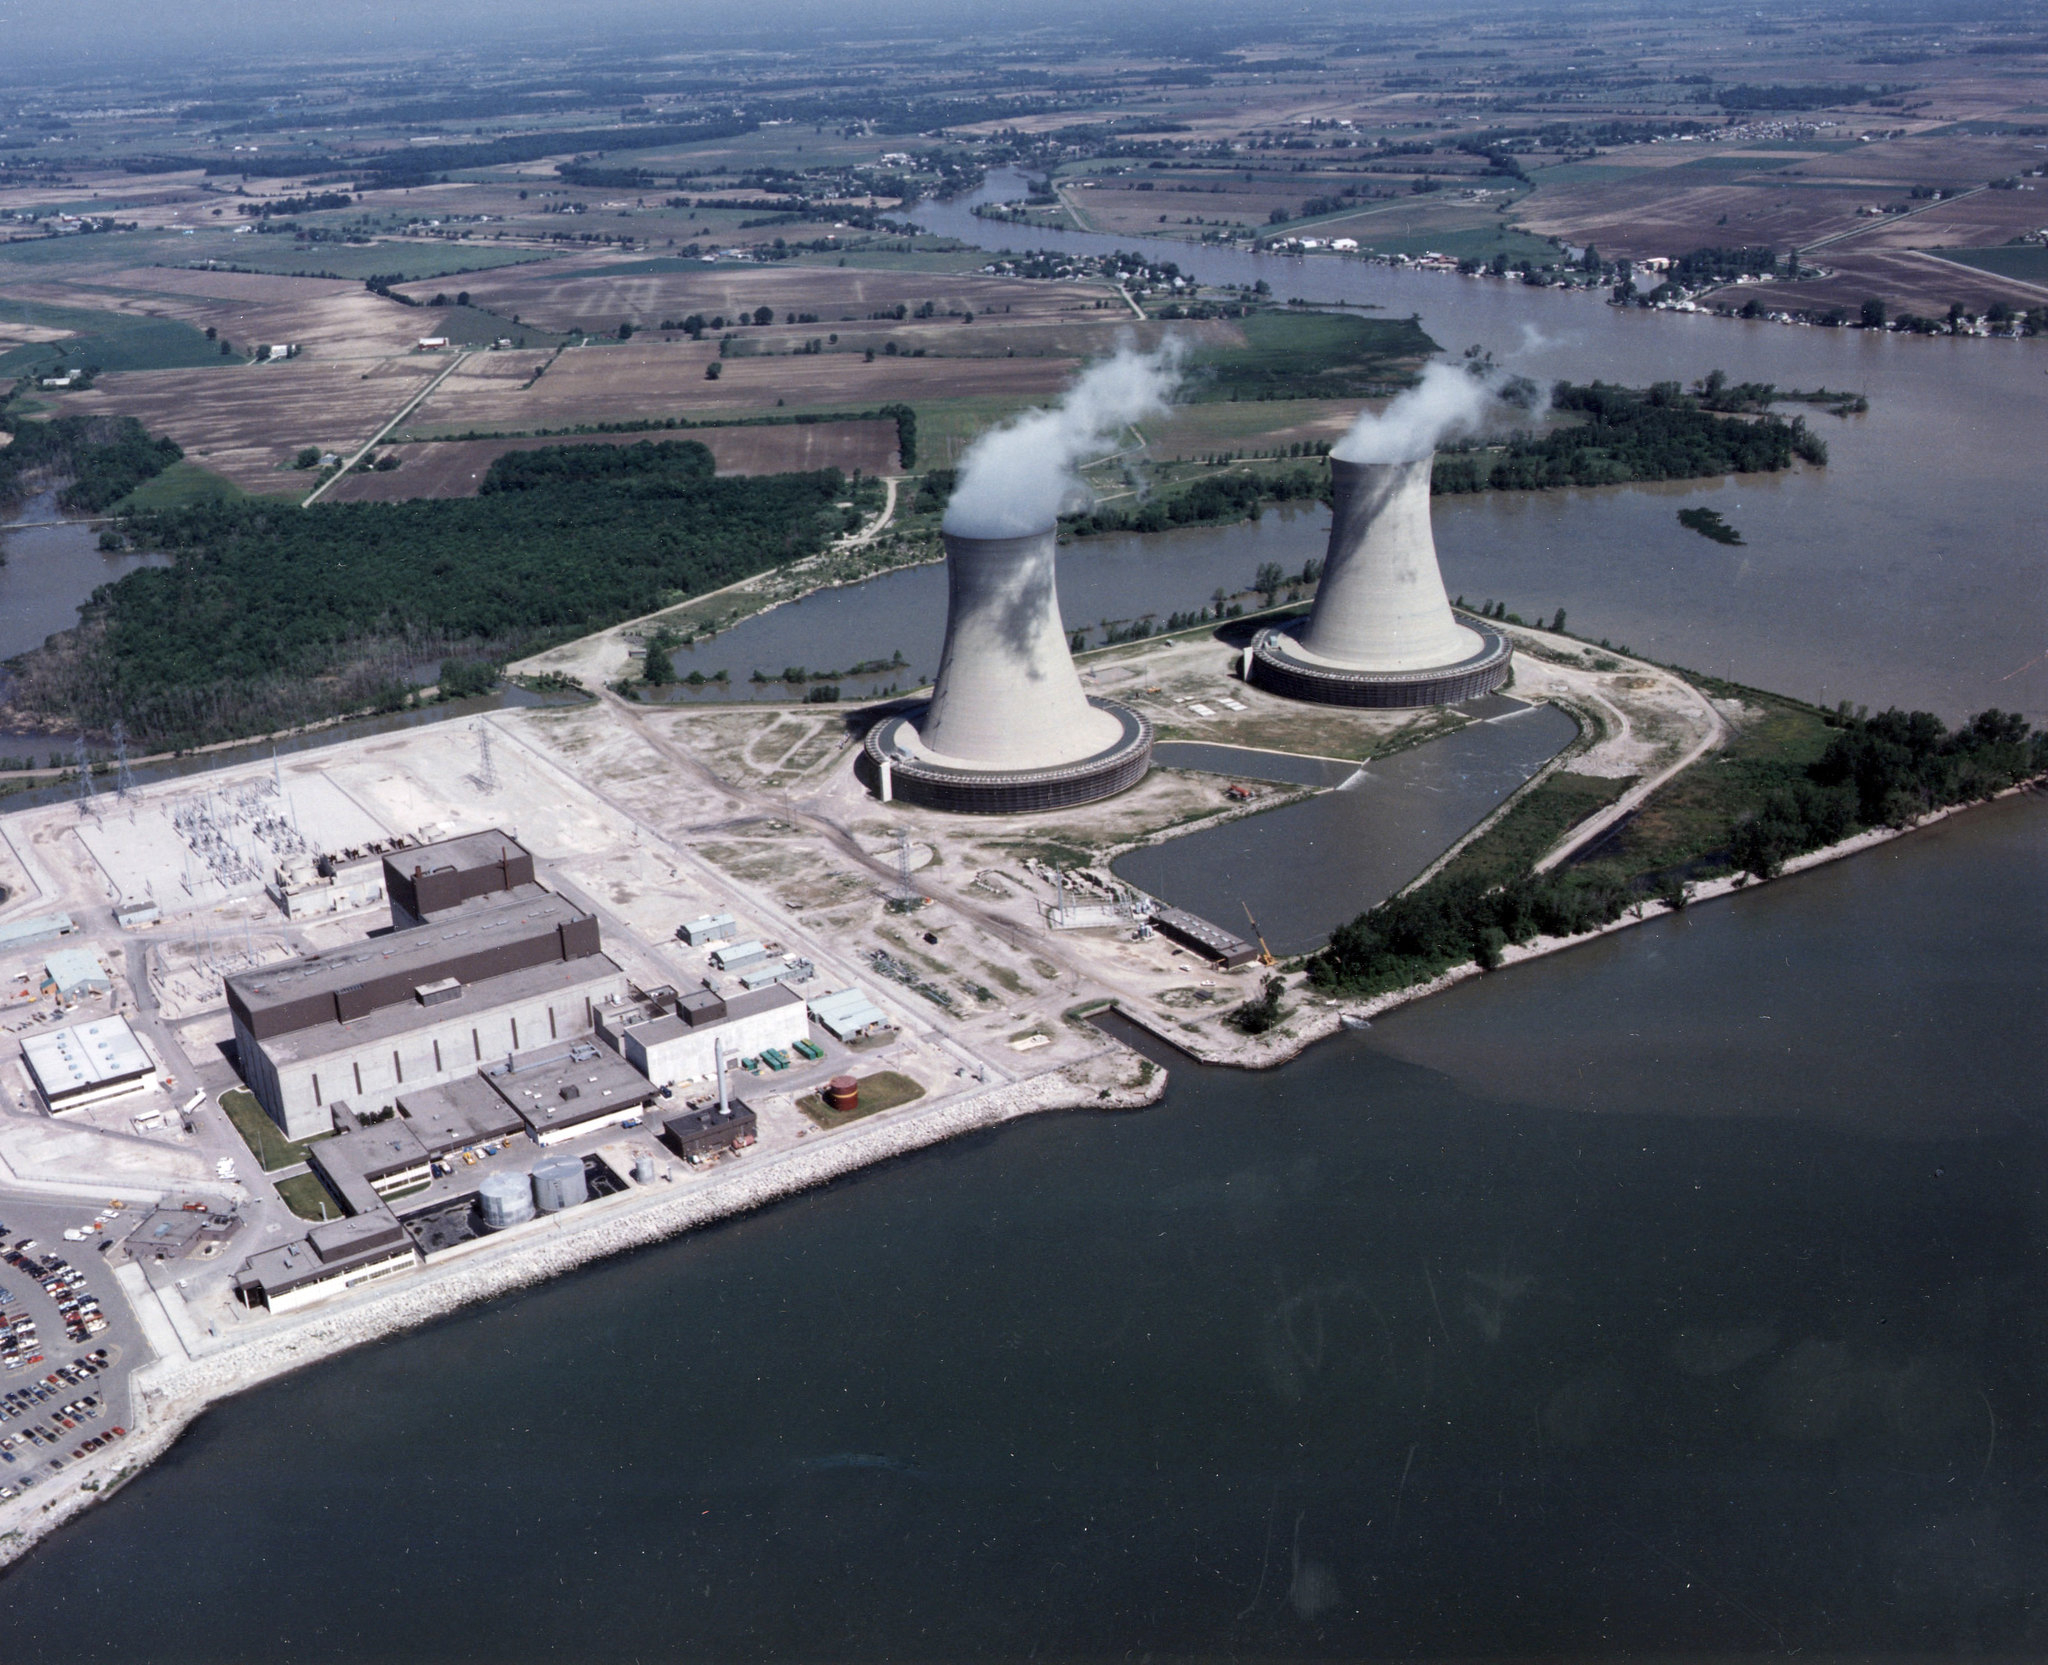 Aerial photograph of Enrico Fermi Nuclear Generating Station in Newport, Michigan. The photo shows two large cooling towers on a point extending into water. Nearby is a rectangular bulidng and other structures. In the distance, the flat landscape is made up of a patchwork of fields and trees.